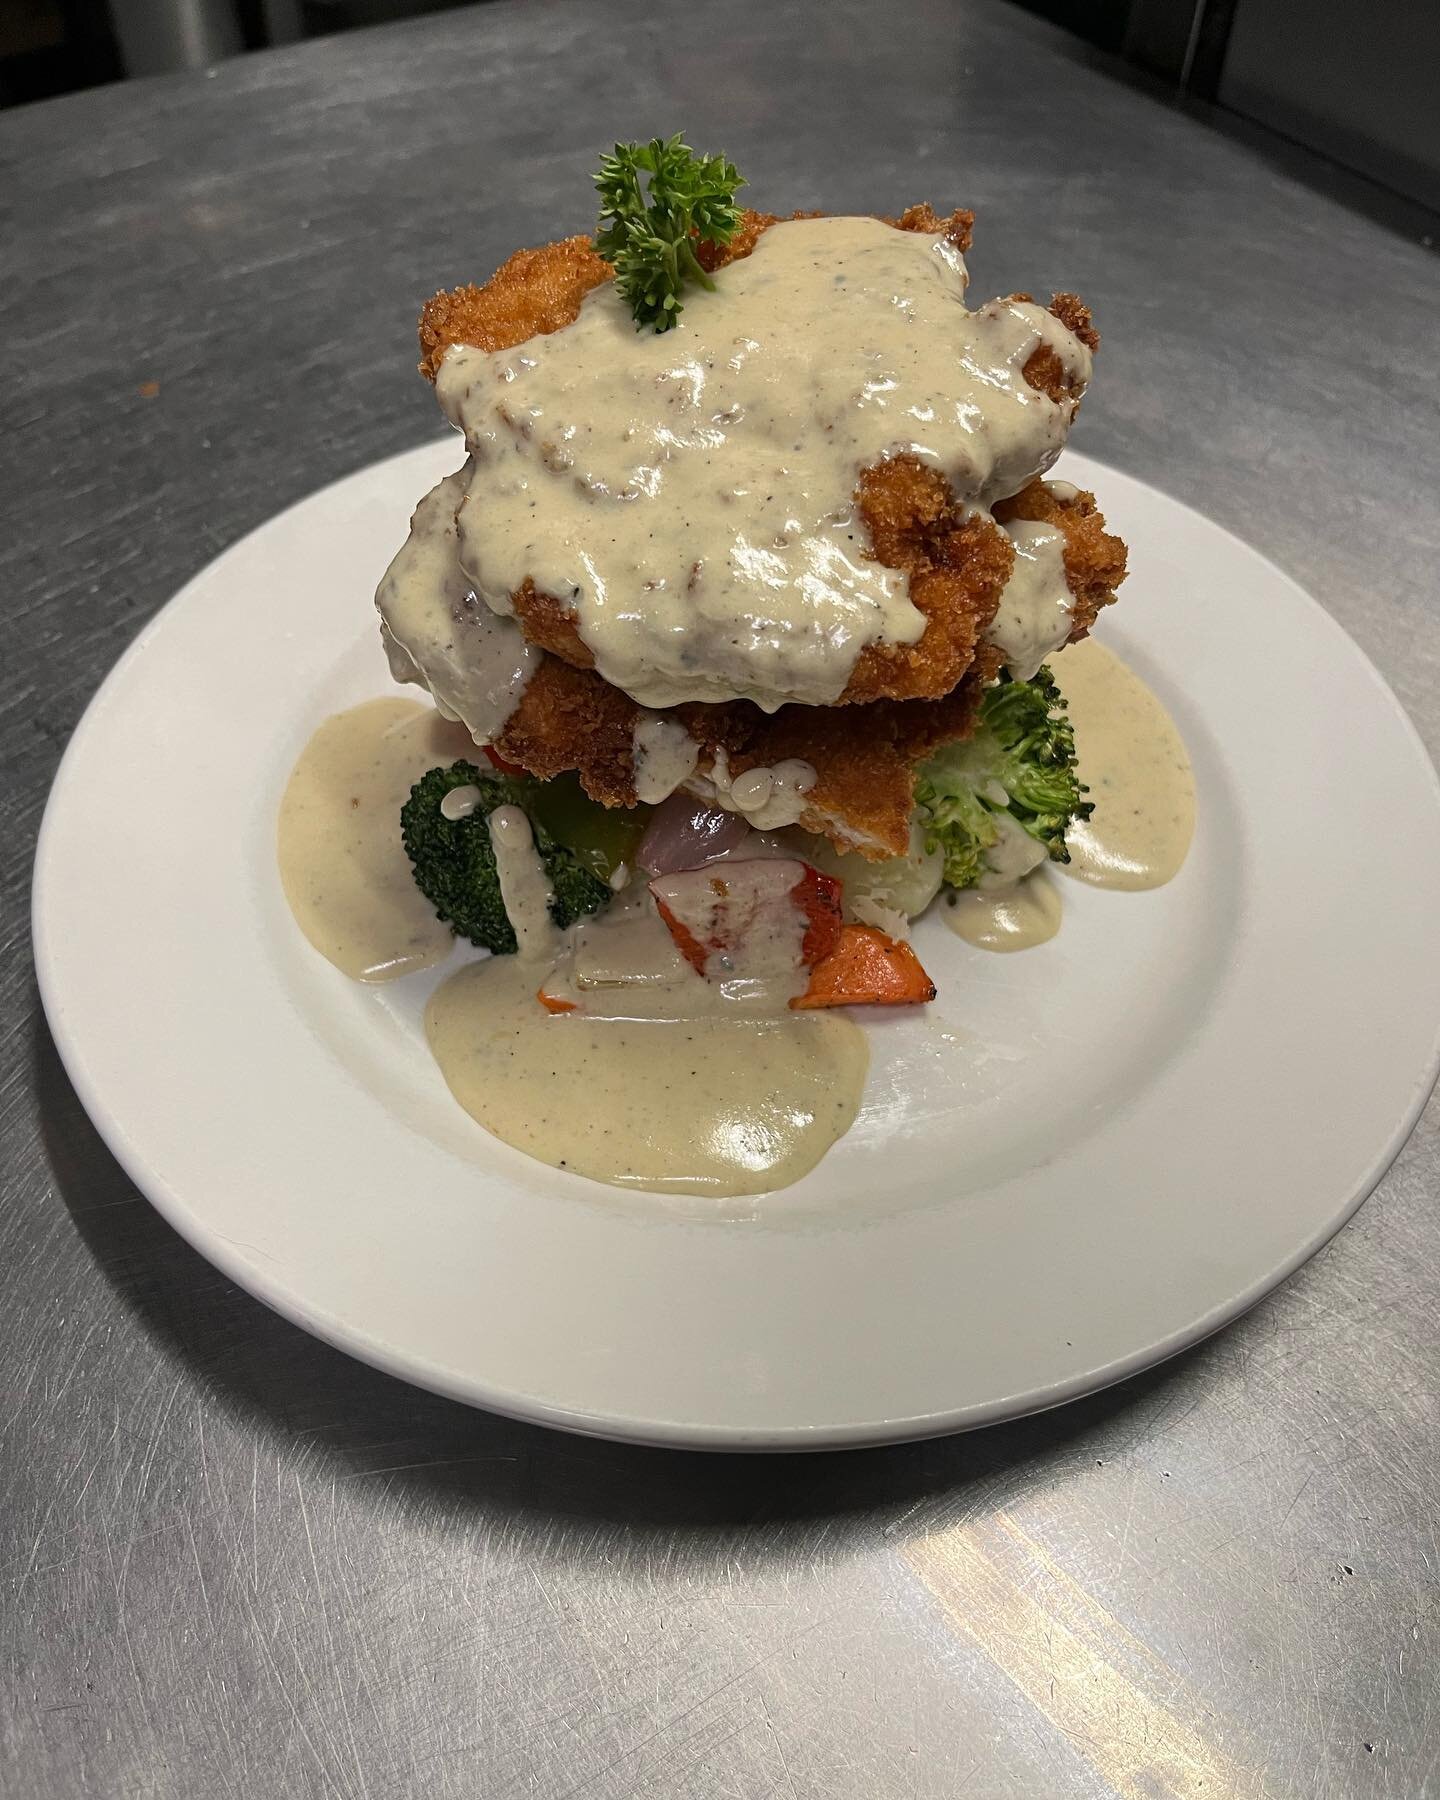 Chicken Schnitzel on mash with saut&eacute;ed veggies in a Asiago B&eacute;chamel 

#BloorWestVillage #PubFare #PubFeatures #DinnerFeature #CraftBeer #Specials